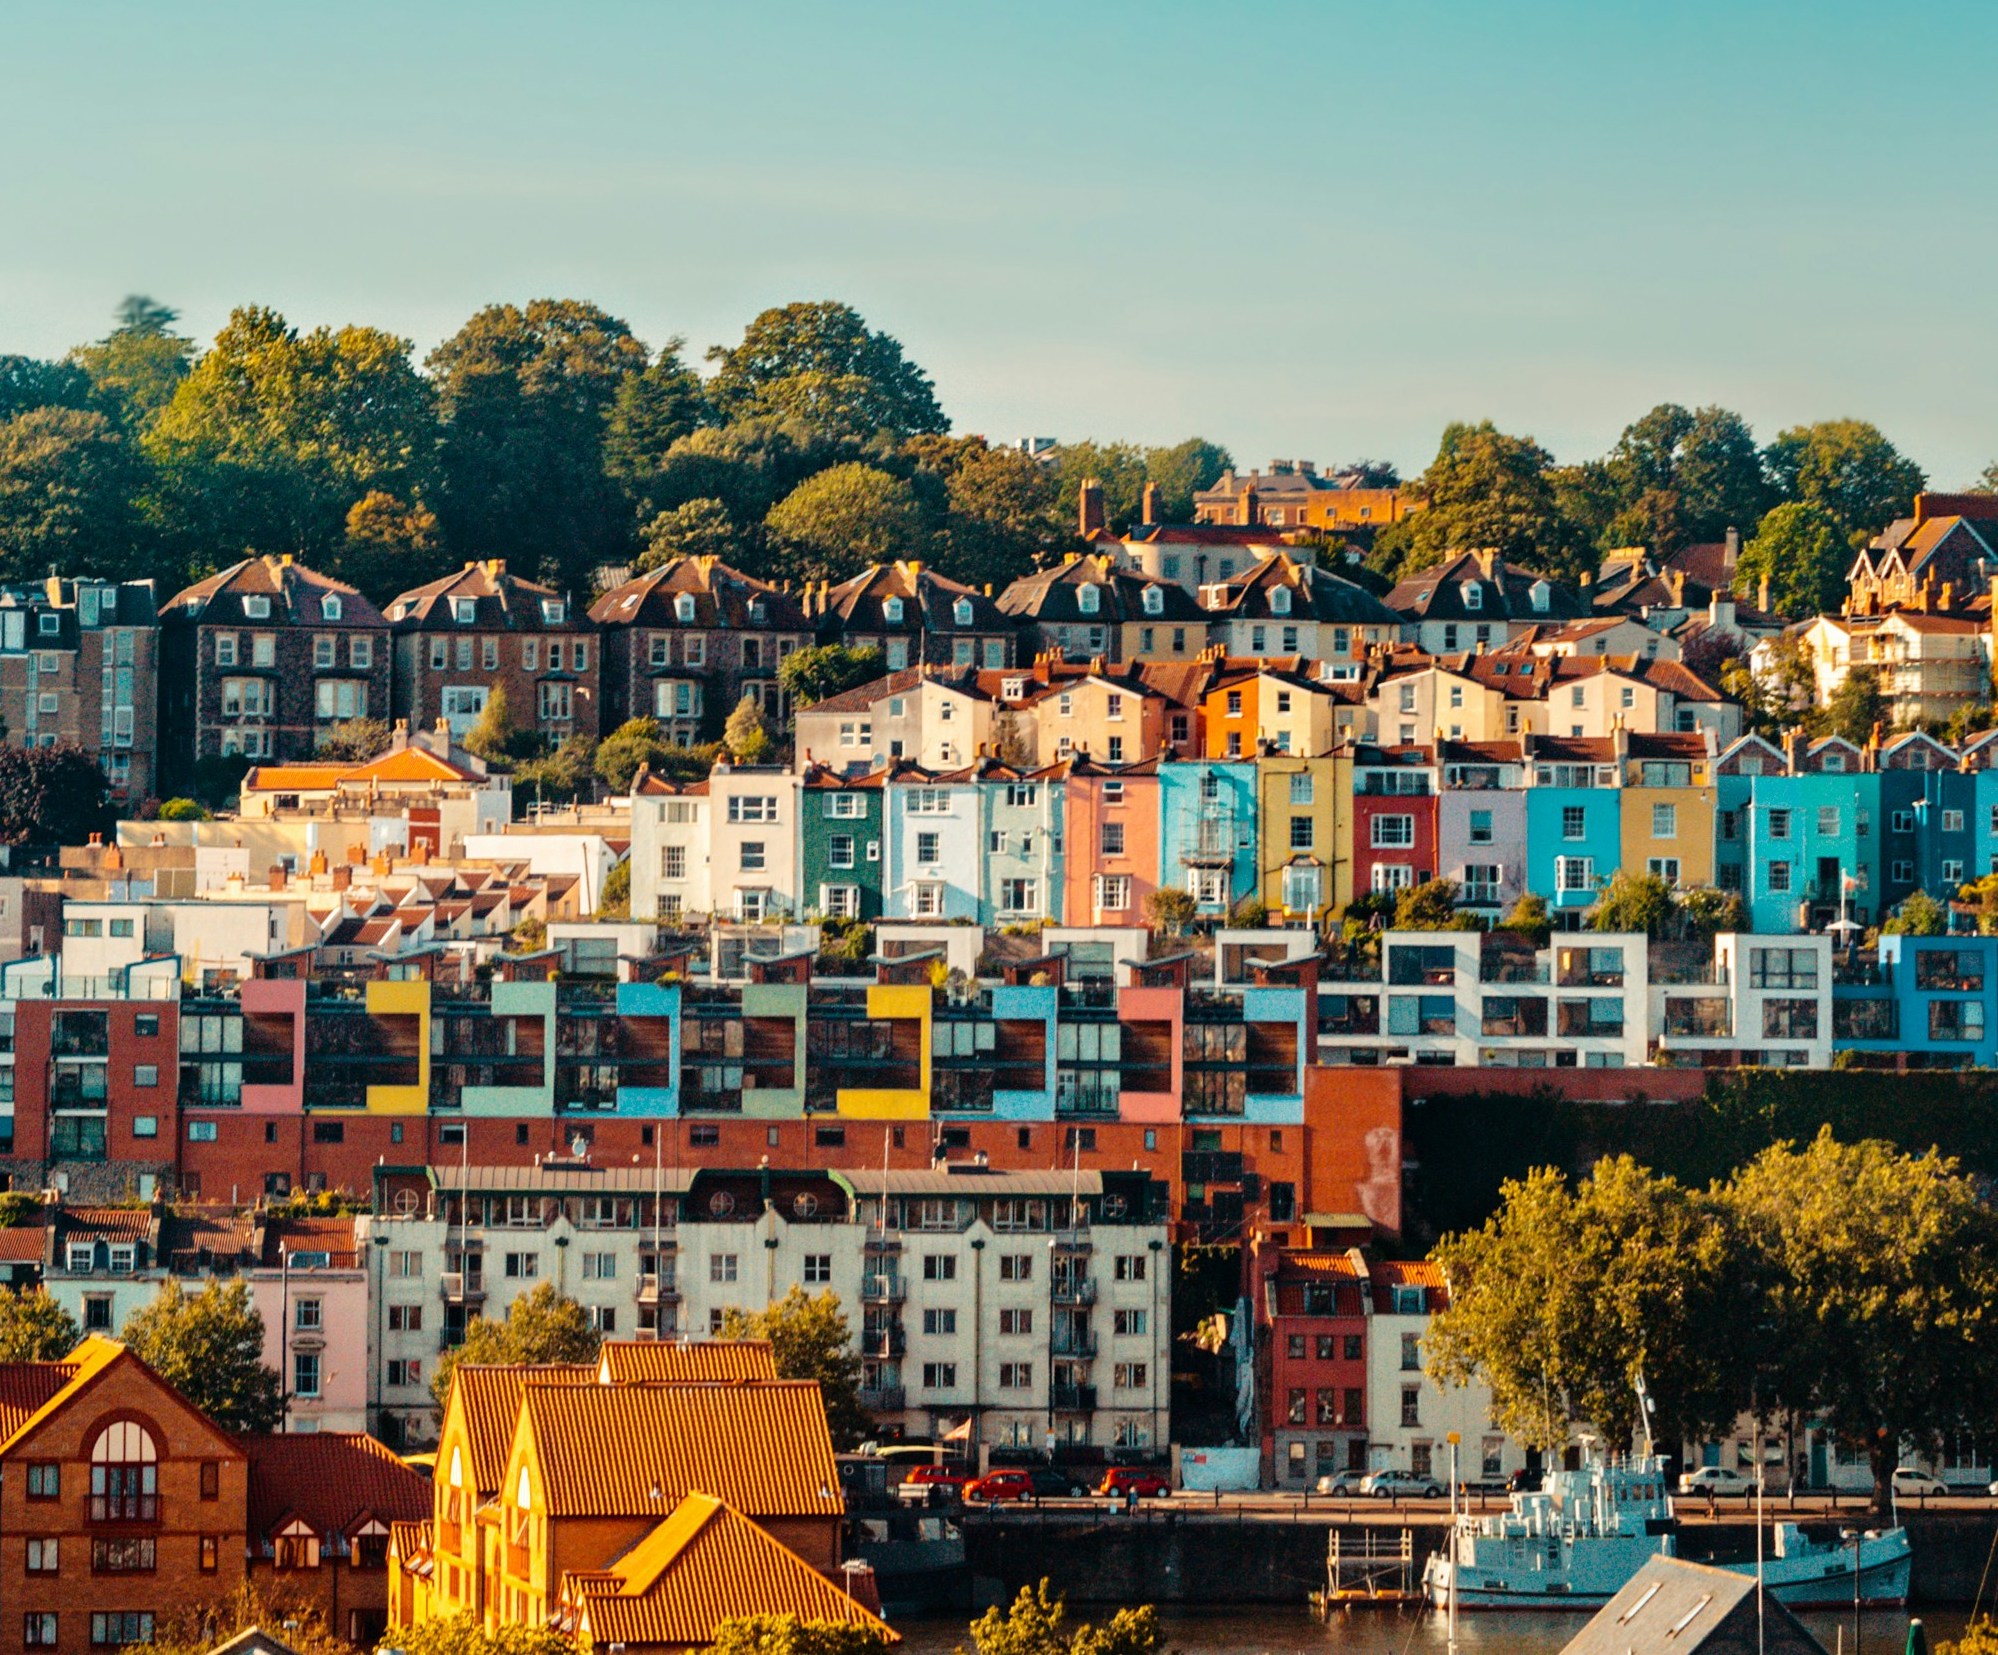 View of colourful terraced houses in Bristol, the city Unite Foundation was founded